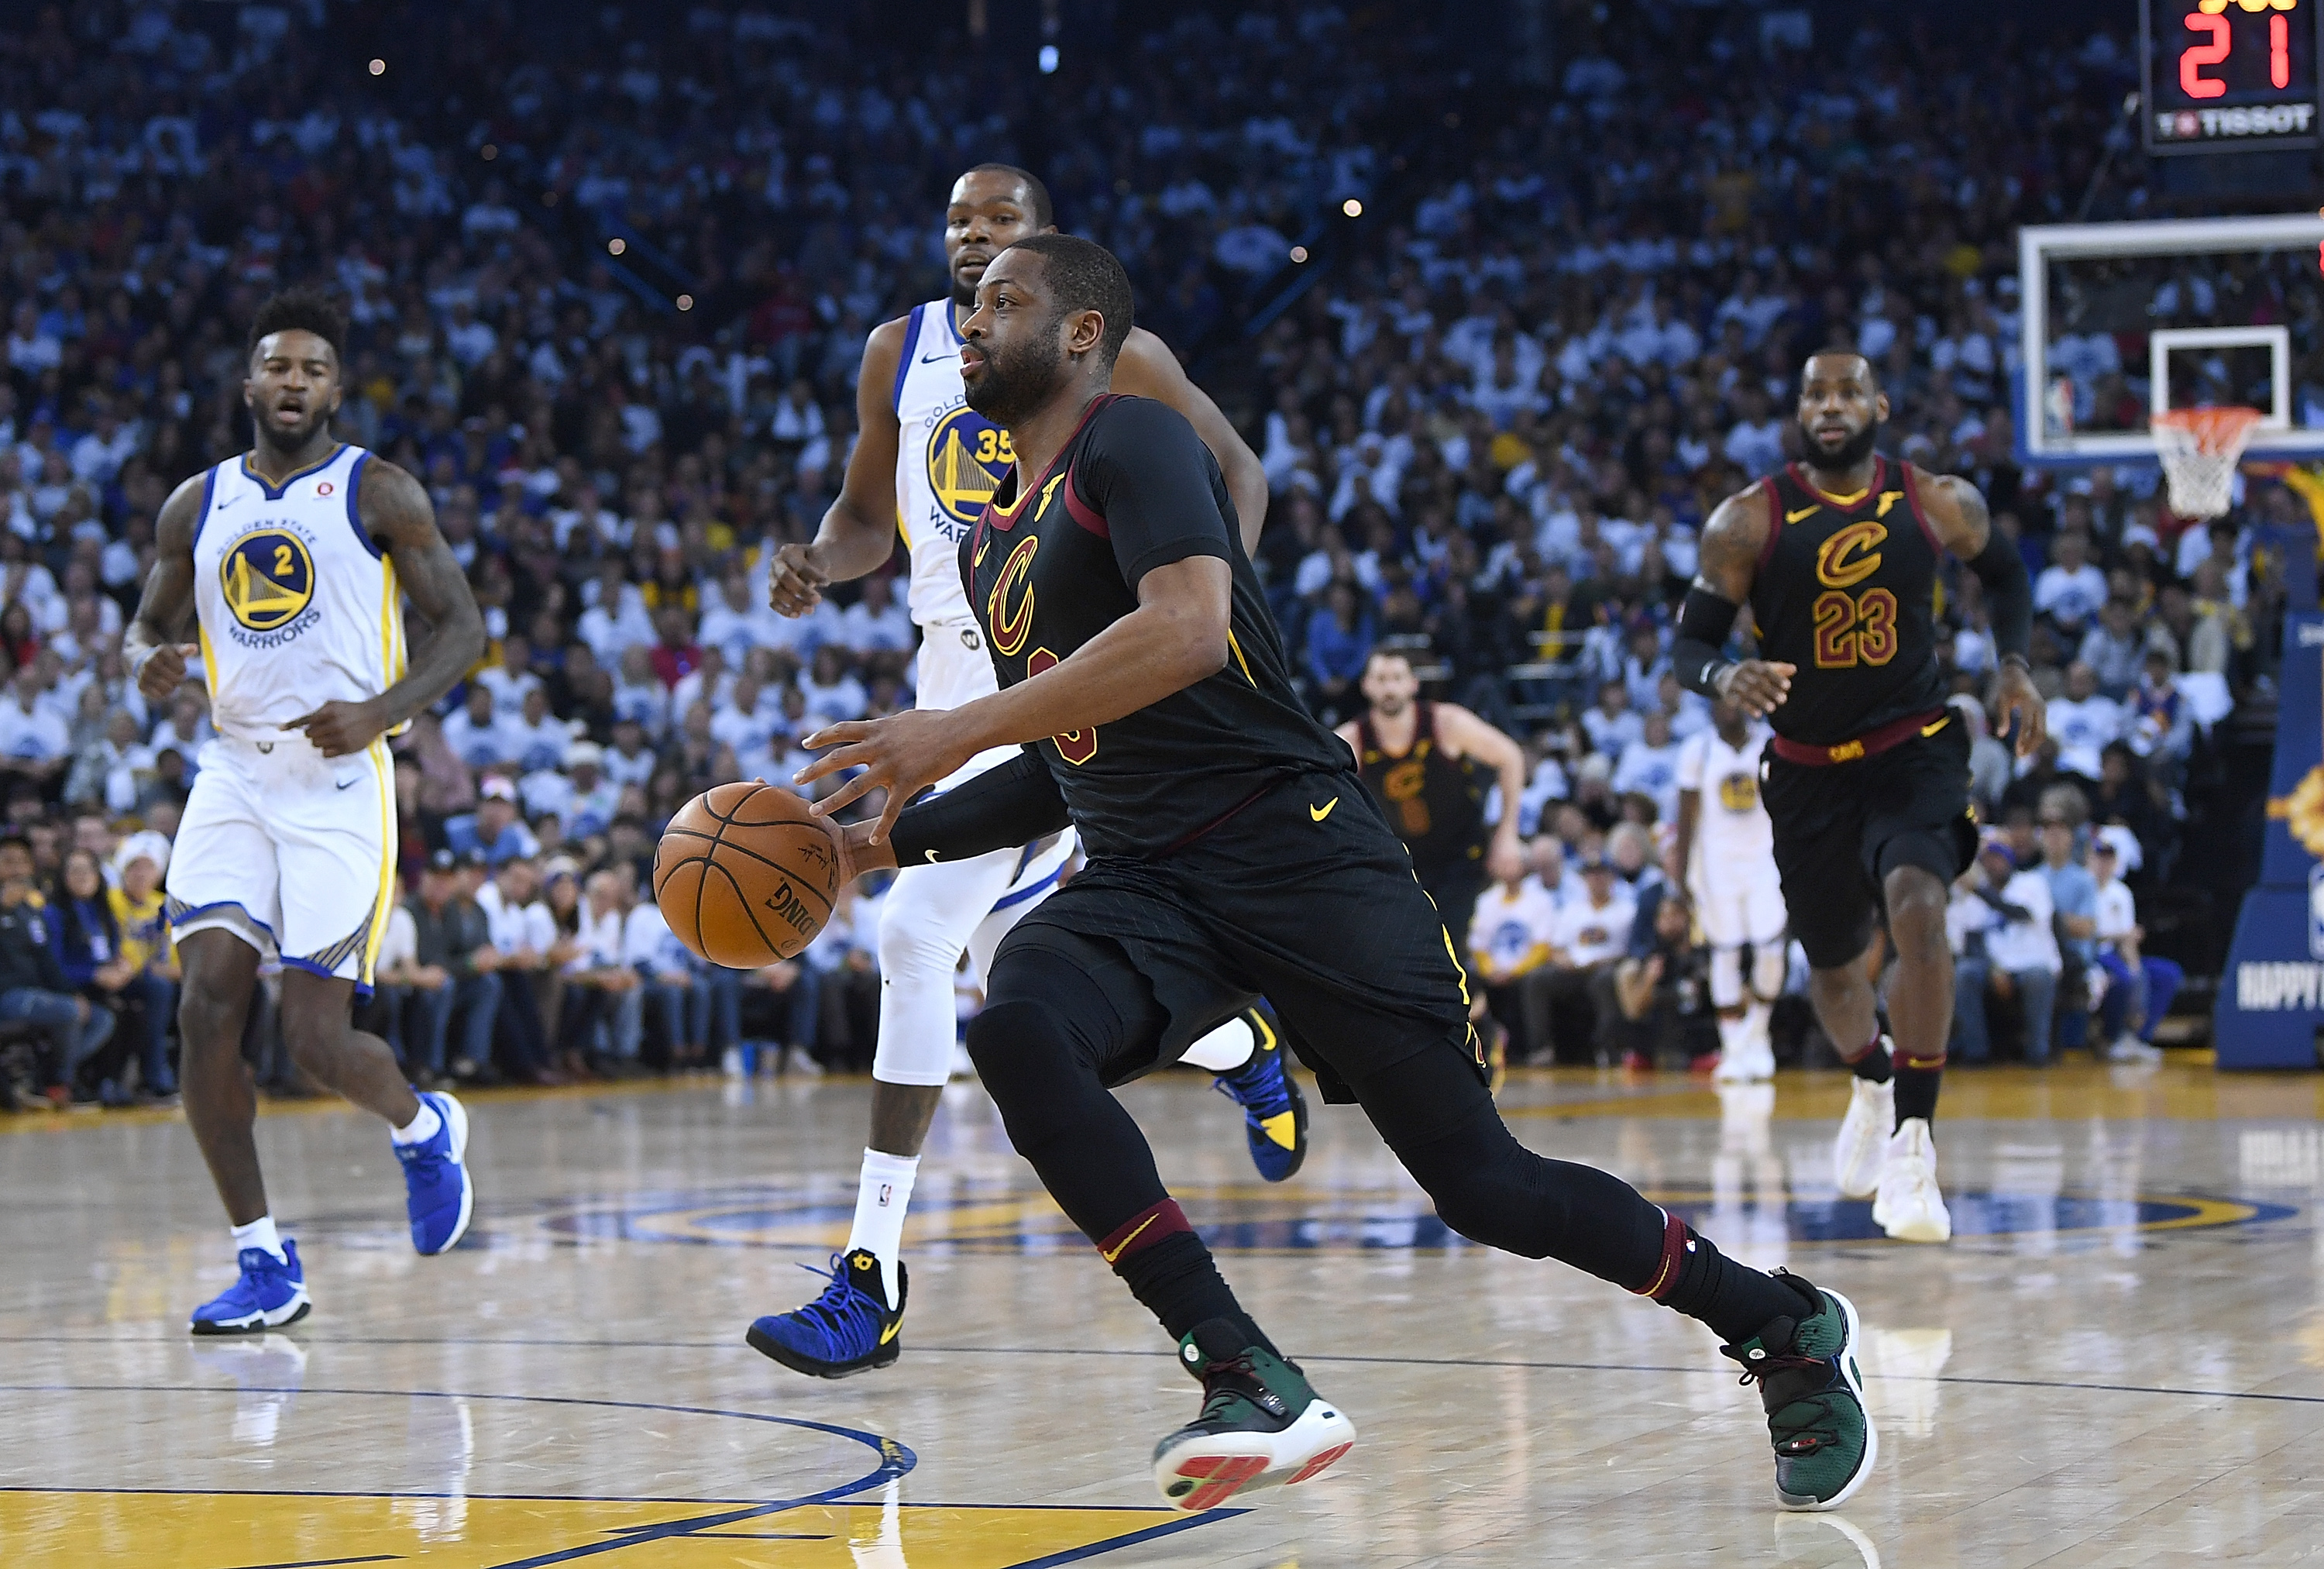 After introspection, Dwyane Wade thrives in bench role for Cavaliers.